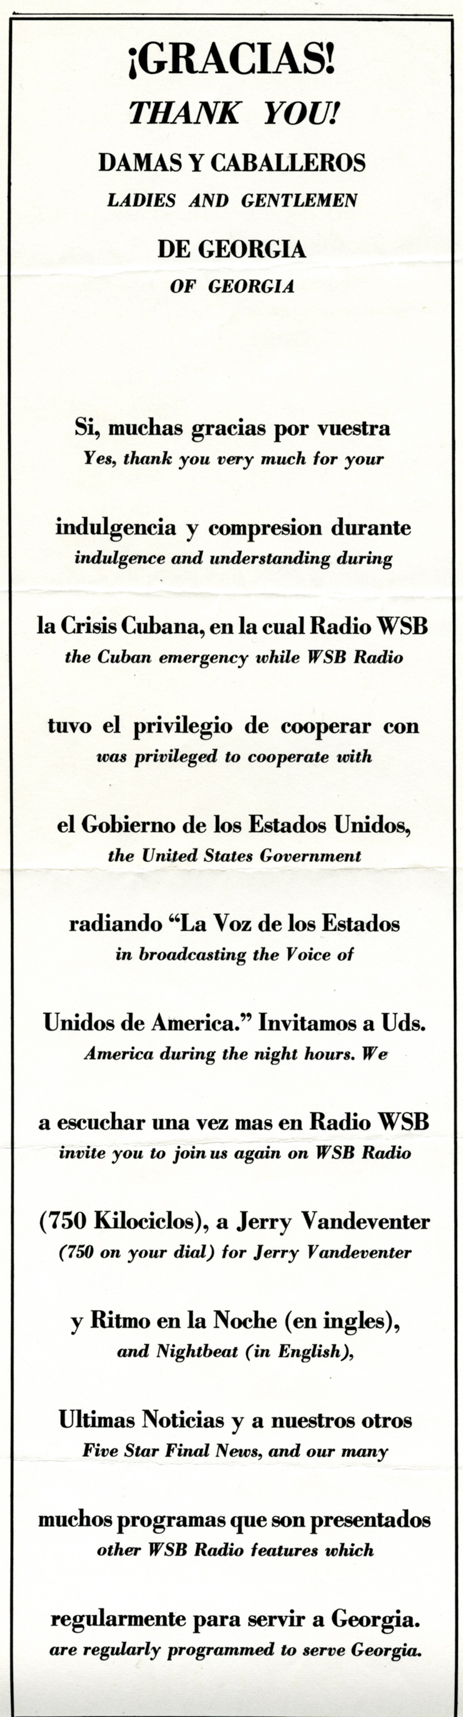 Image of a flyer distributed by WSB radio in both English and Spanish thanking listeners for their understanding during the Cuban Missile Crisis